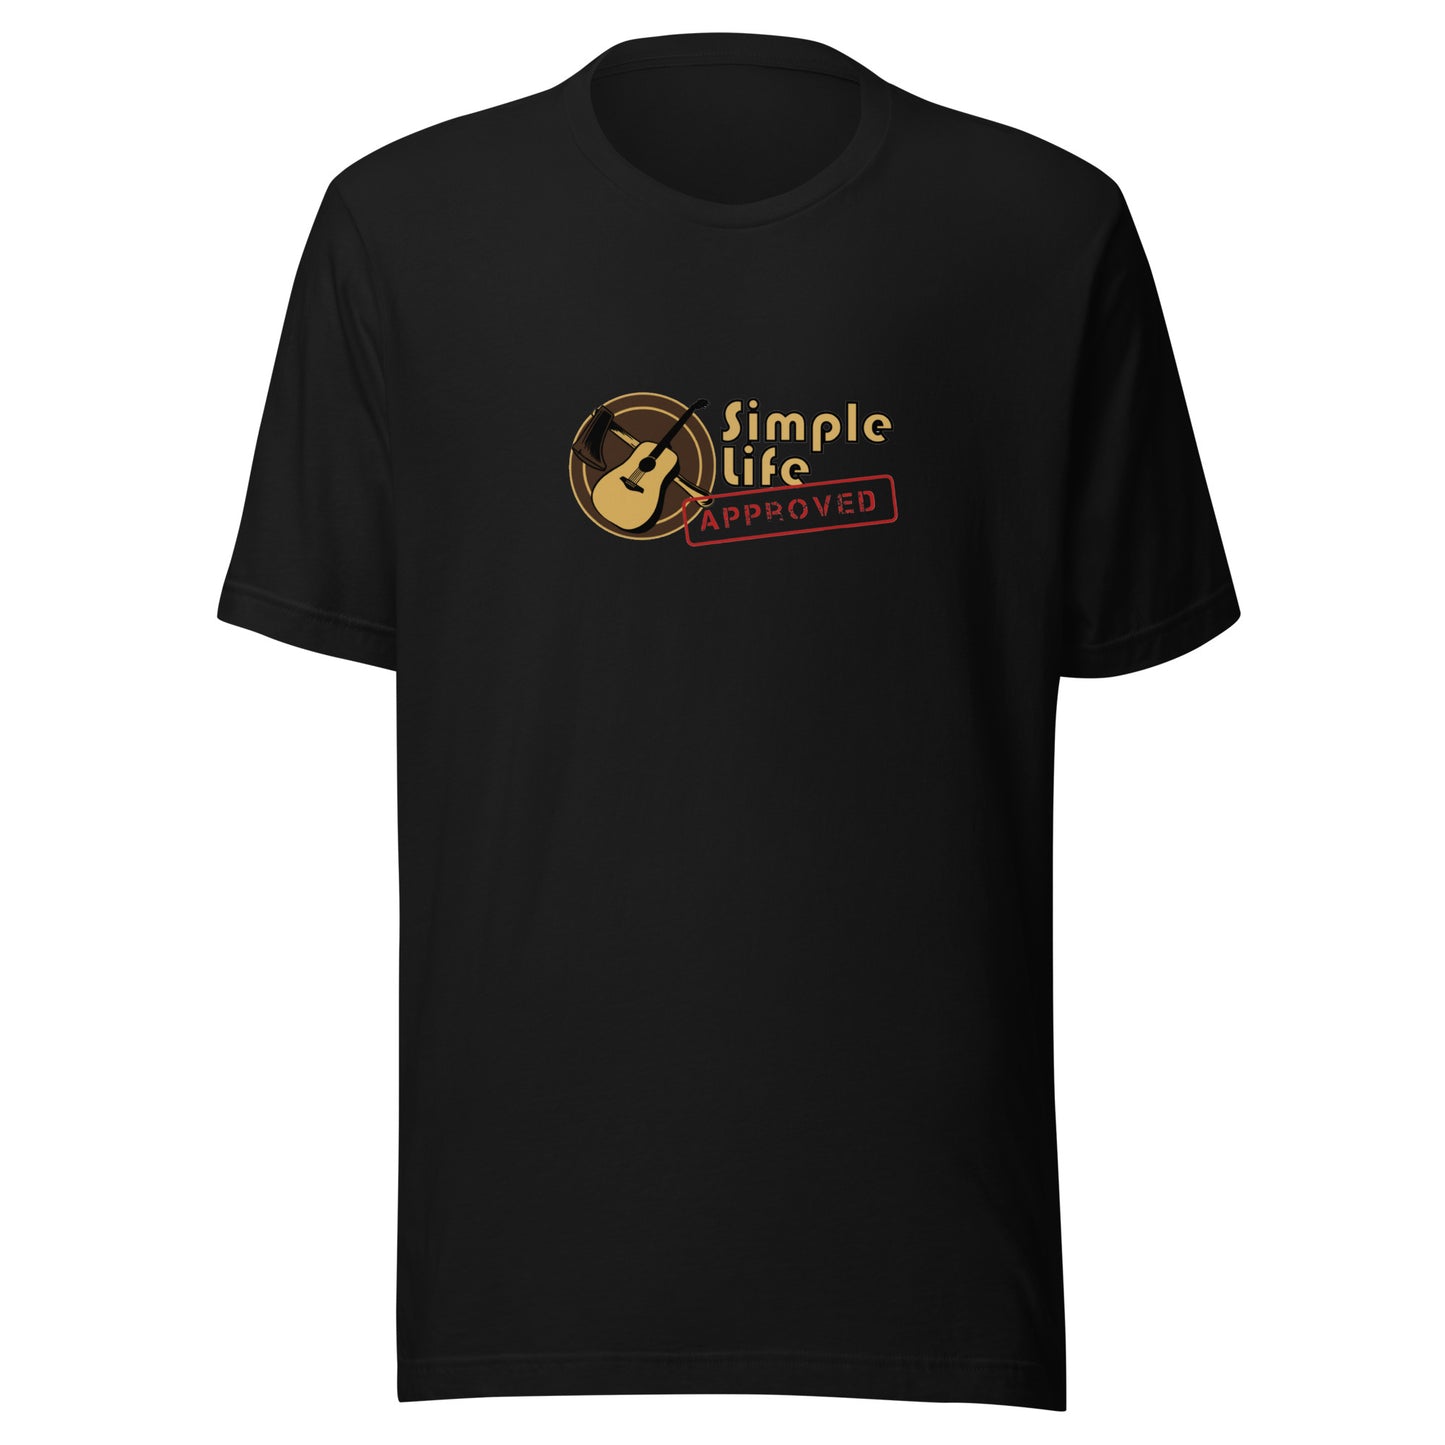 Unisex t-shirt Simple Life Approved